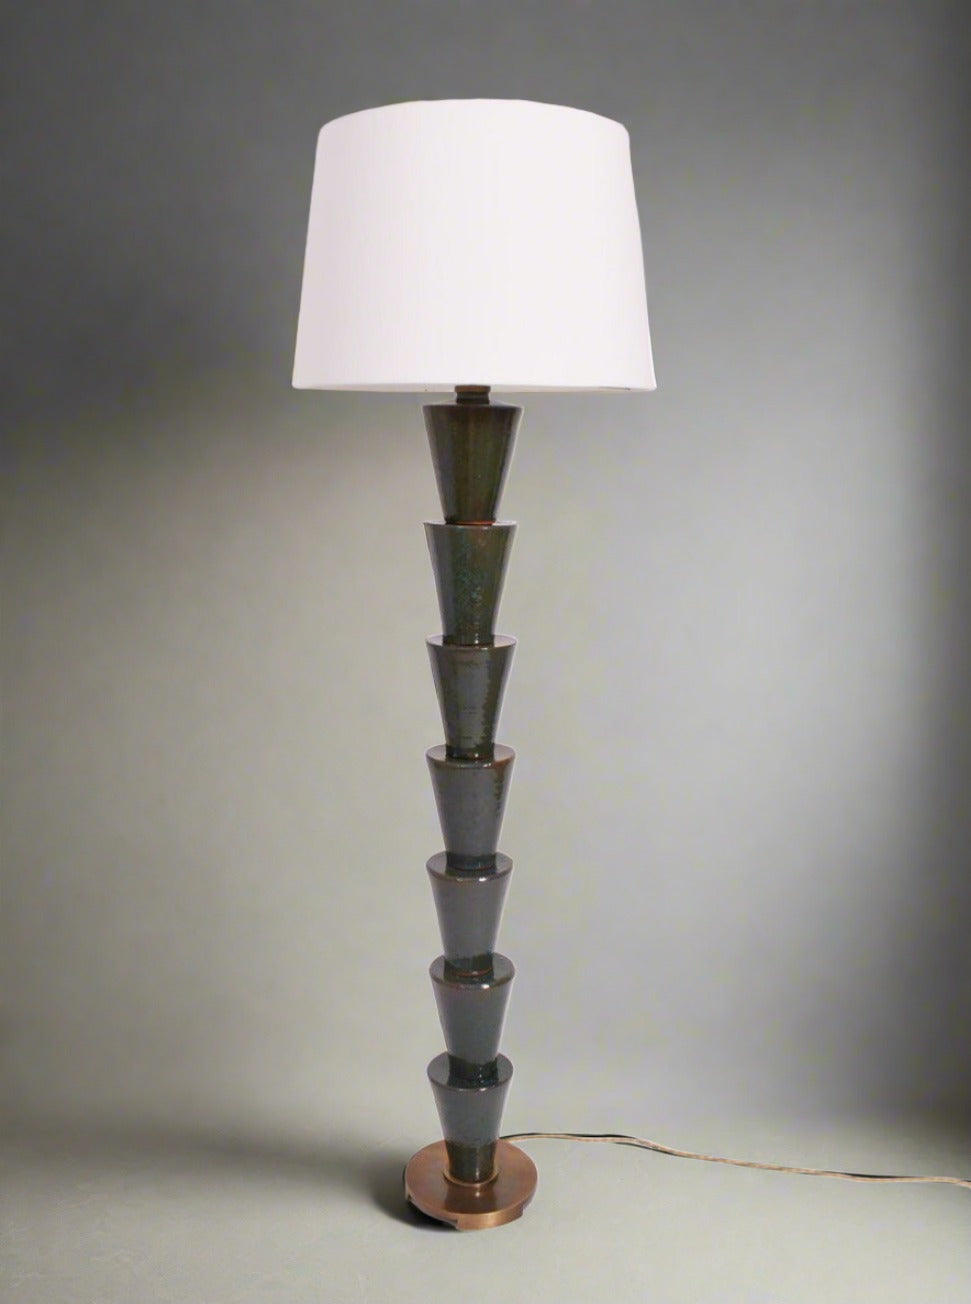 A tall, modern "Nizwa" Floor Lamp by Barracuda Interiors featuring a white lampshade and a stacked, cone-shaped, stoneware glazed base. The lamp is proudly made in Portugal, placed against a white background with a visible power cord running along the floor.